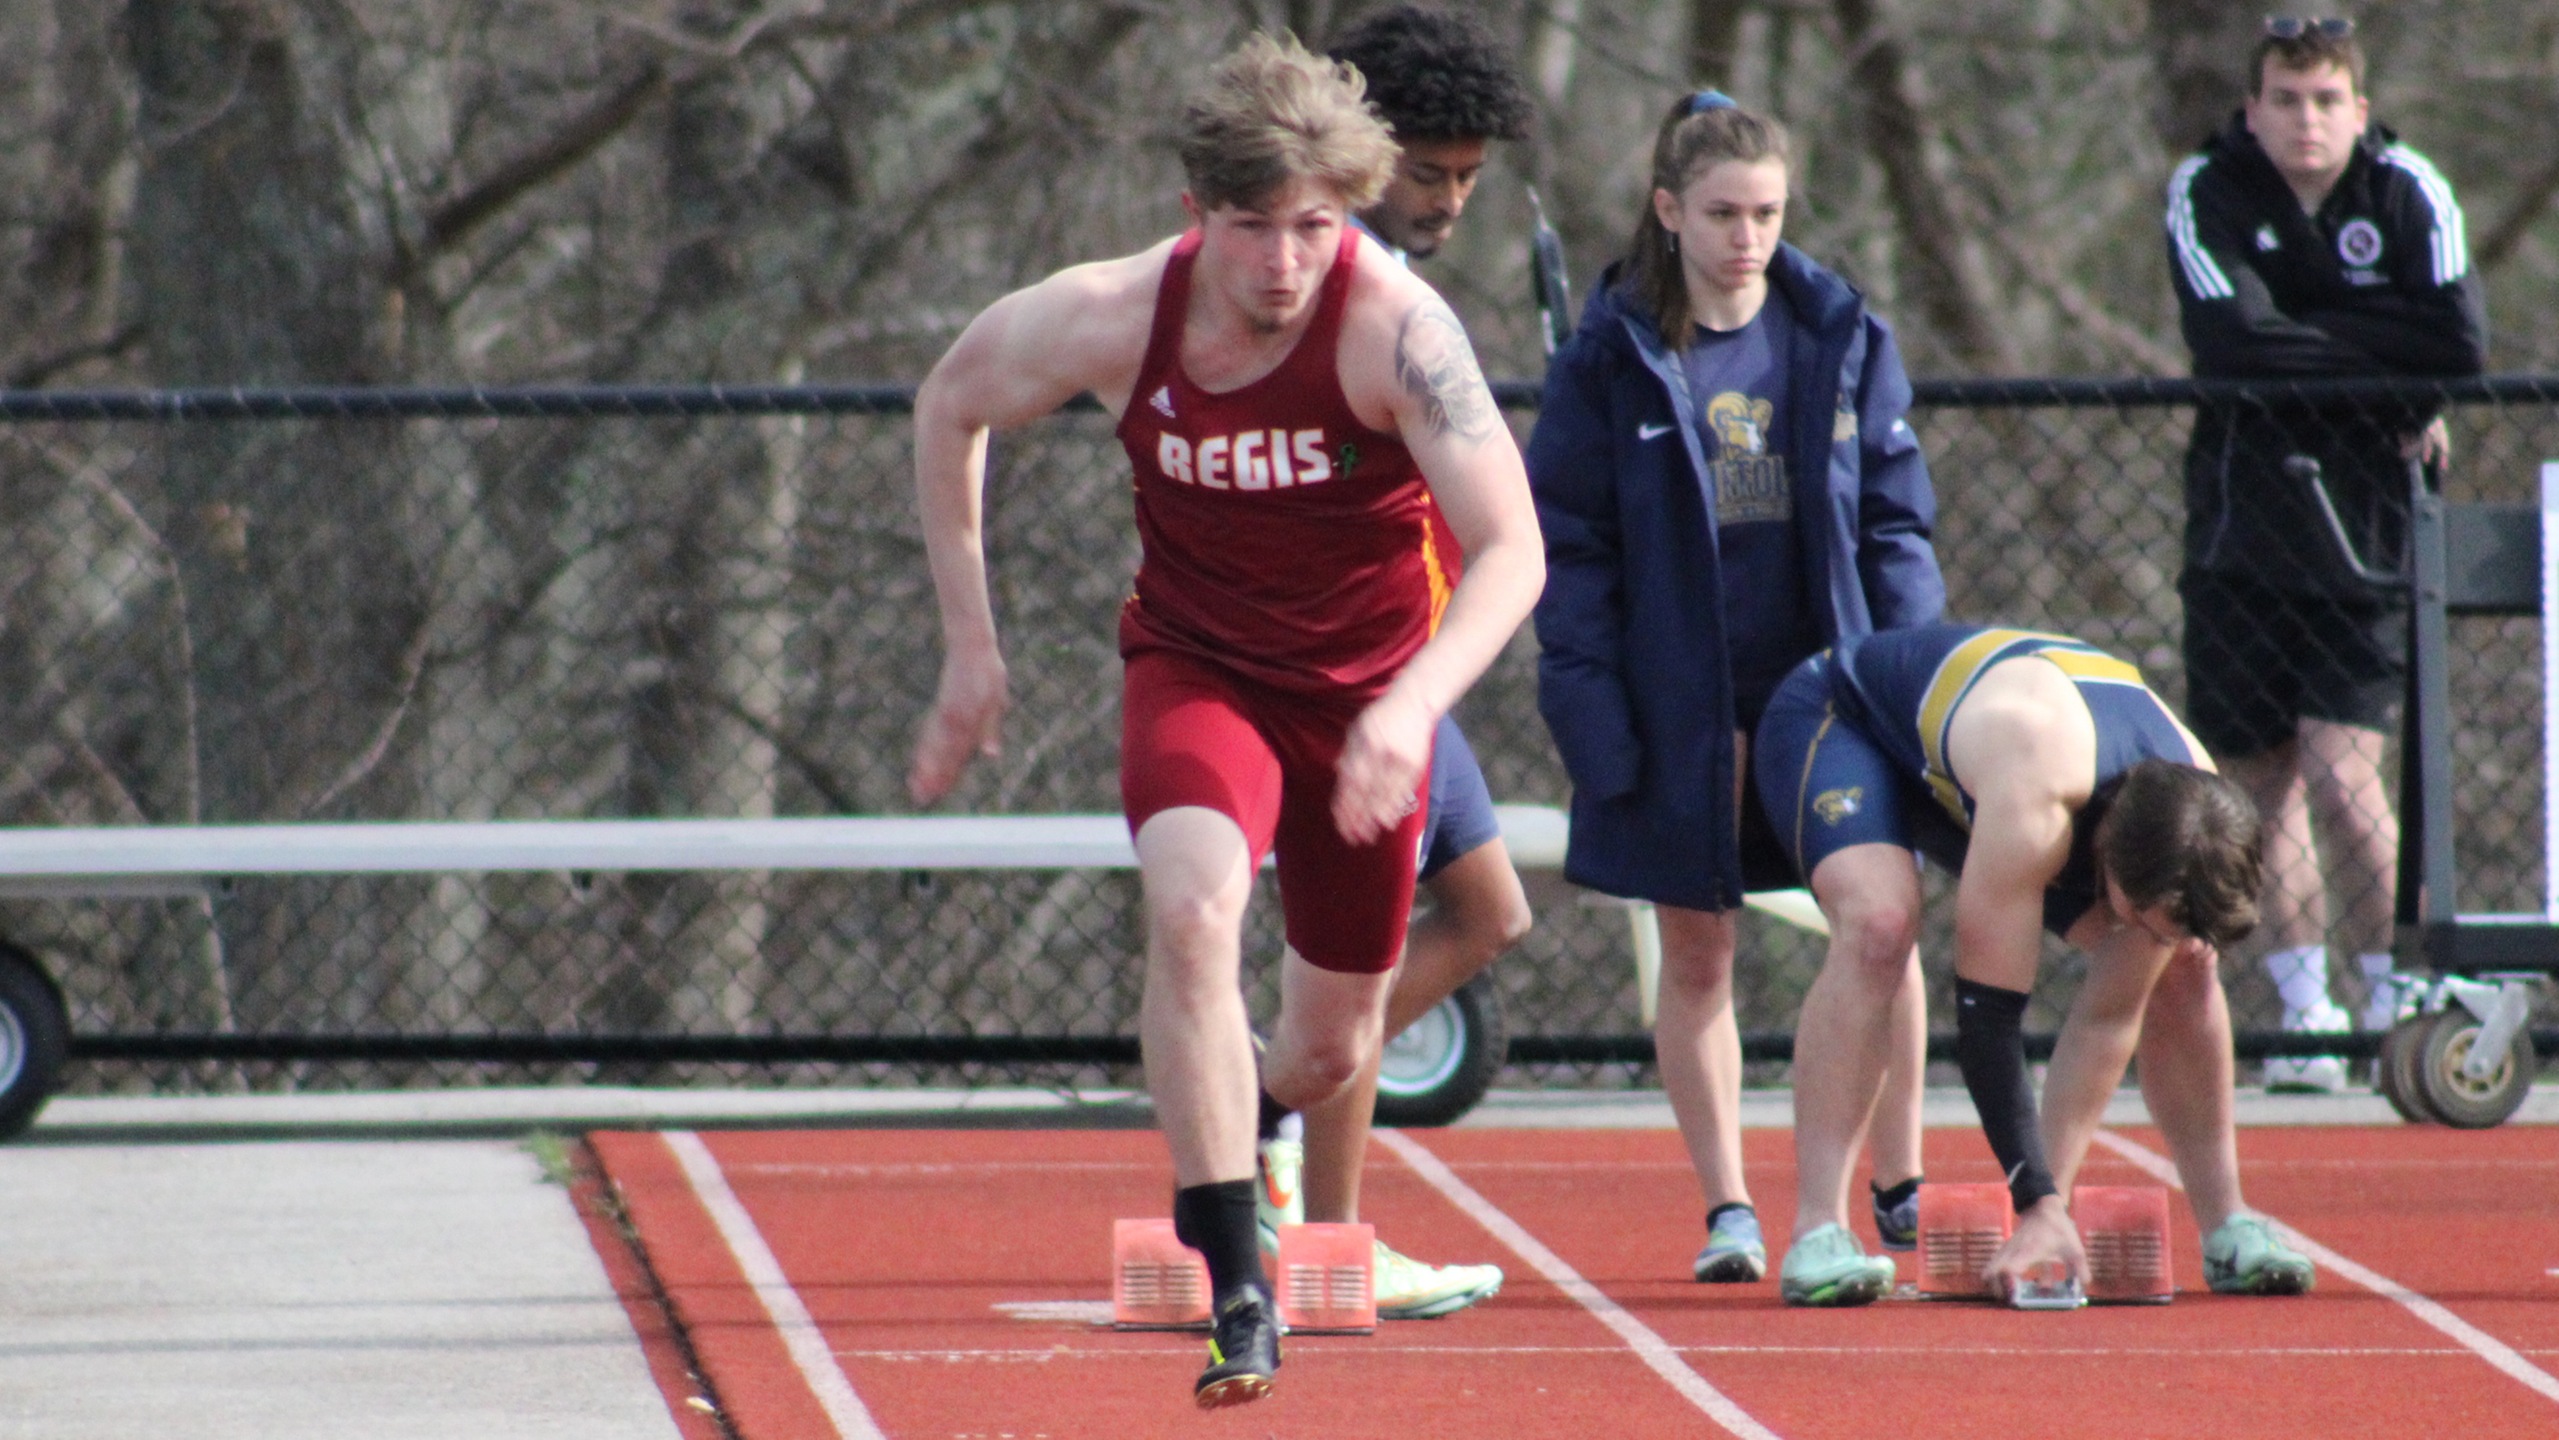 Men’s Track and Field Wins Regis Spring Classic